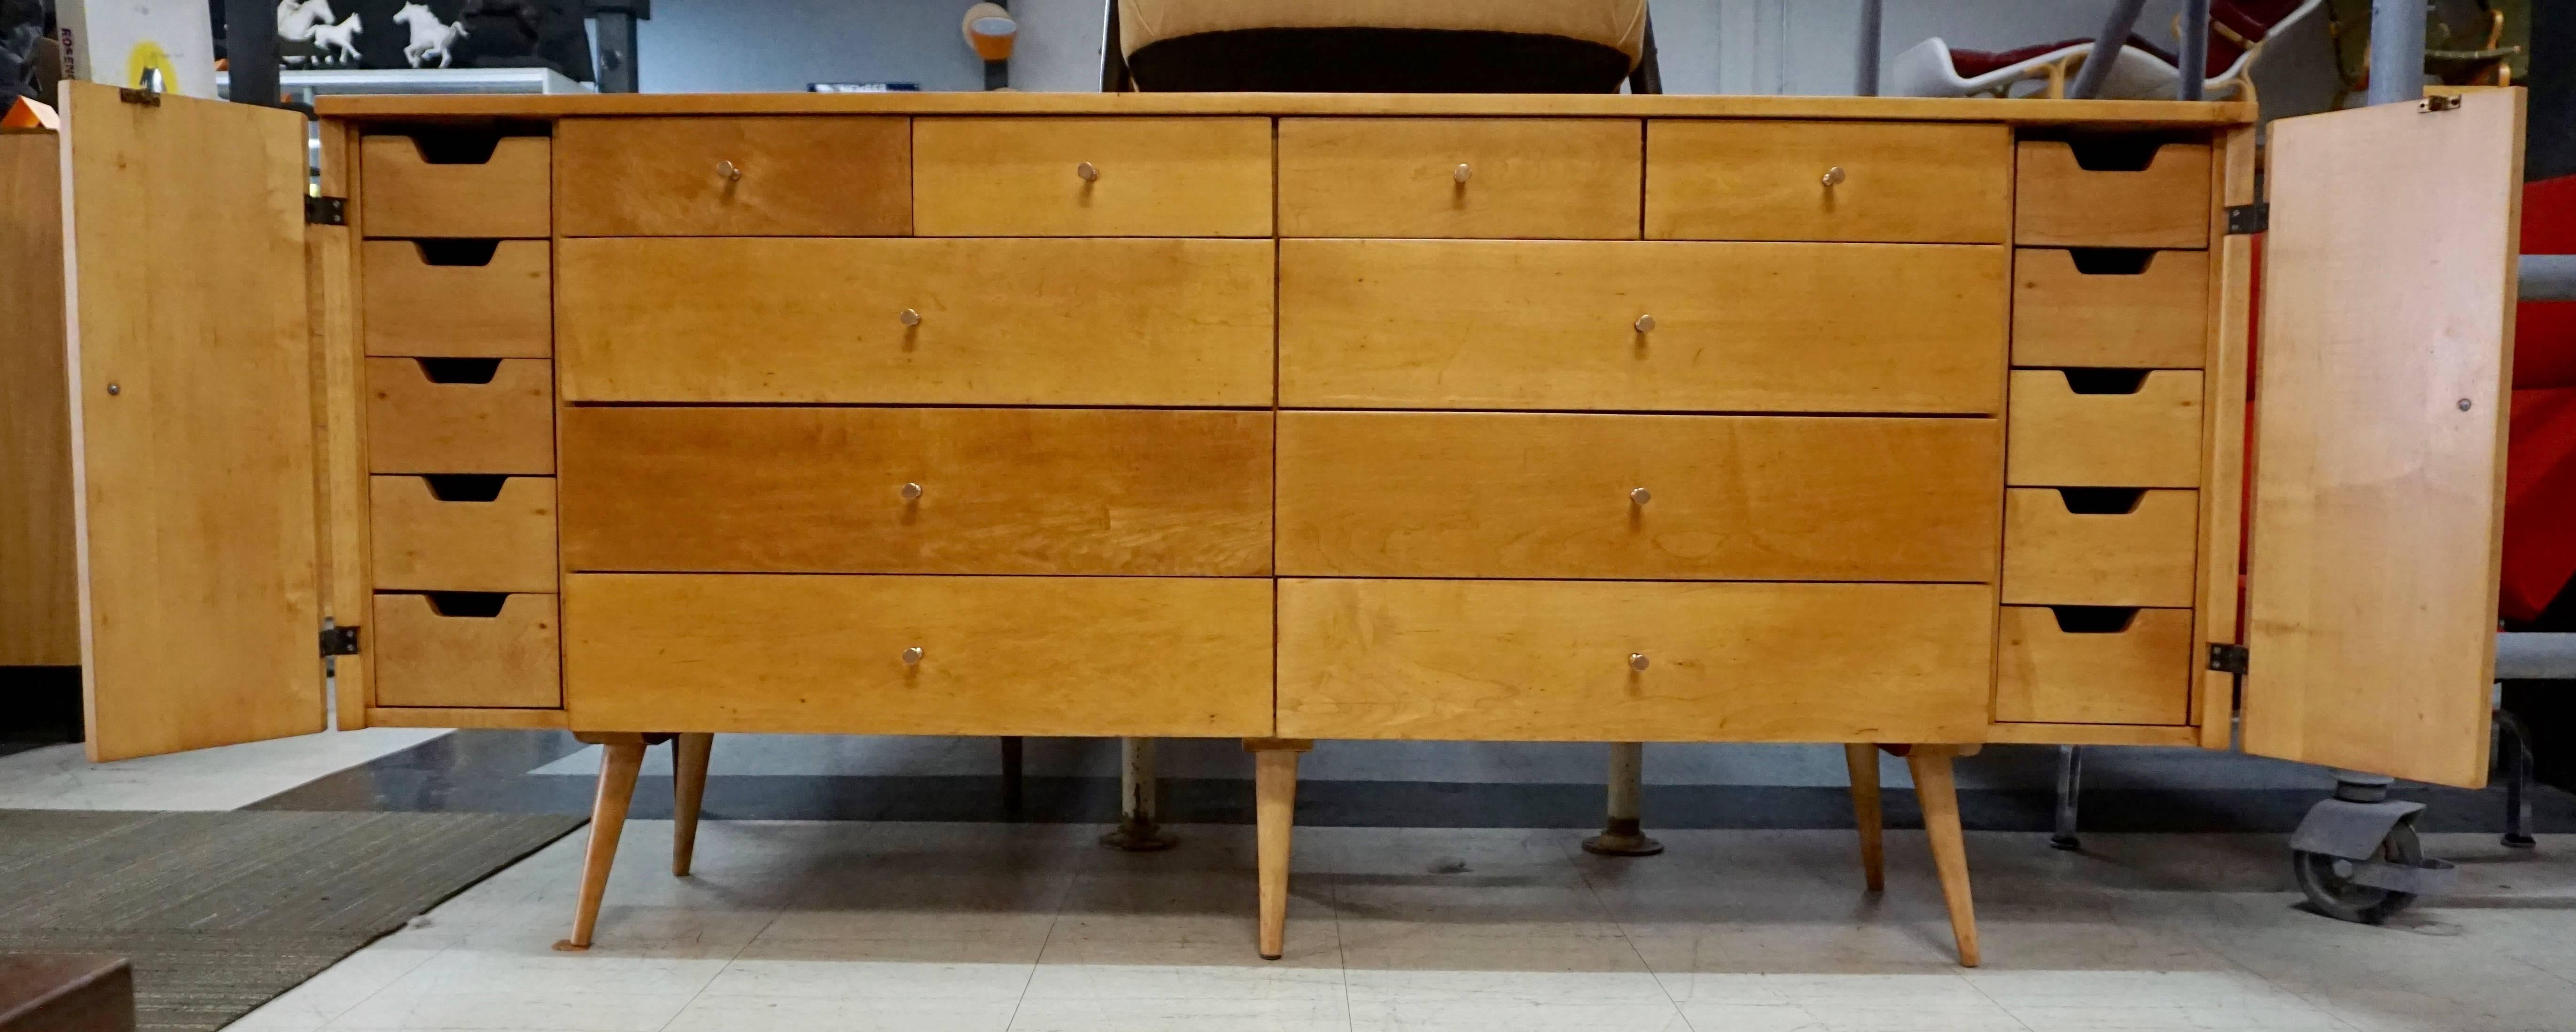 Great solid maple 20-drawer dresser. Has been stripped and lacquered. The knobs are unusual in copper coating. Has a few small imperfections under the new finish, small dark lines and spots, all shown in photos. Unusual coloring on some of the